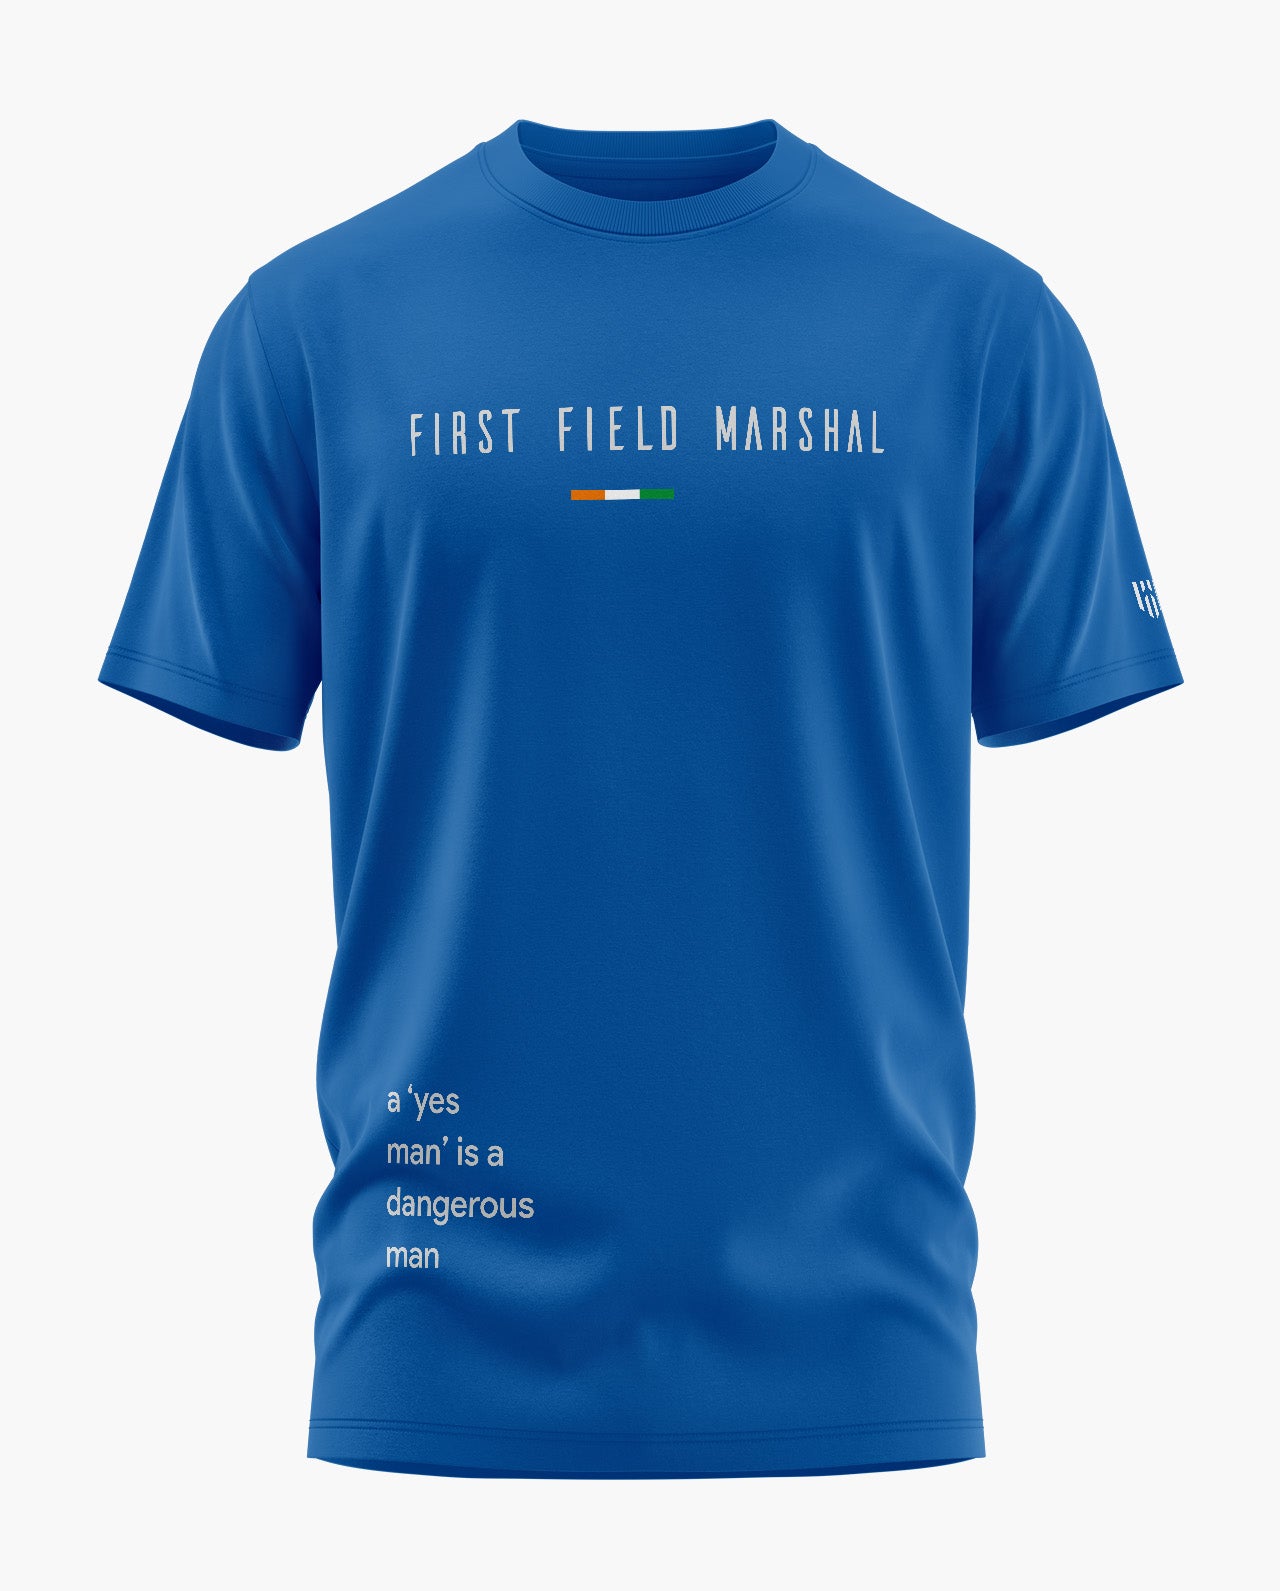 THE FIRST FIELD MARSHAL T-Shirt